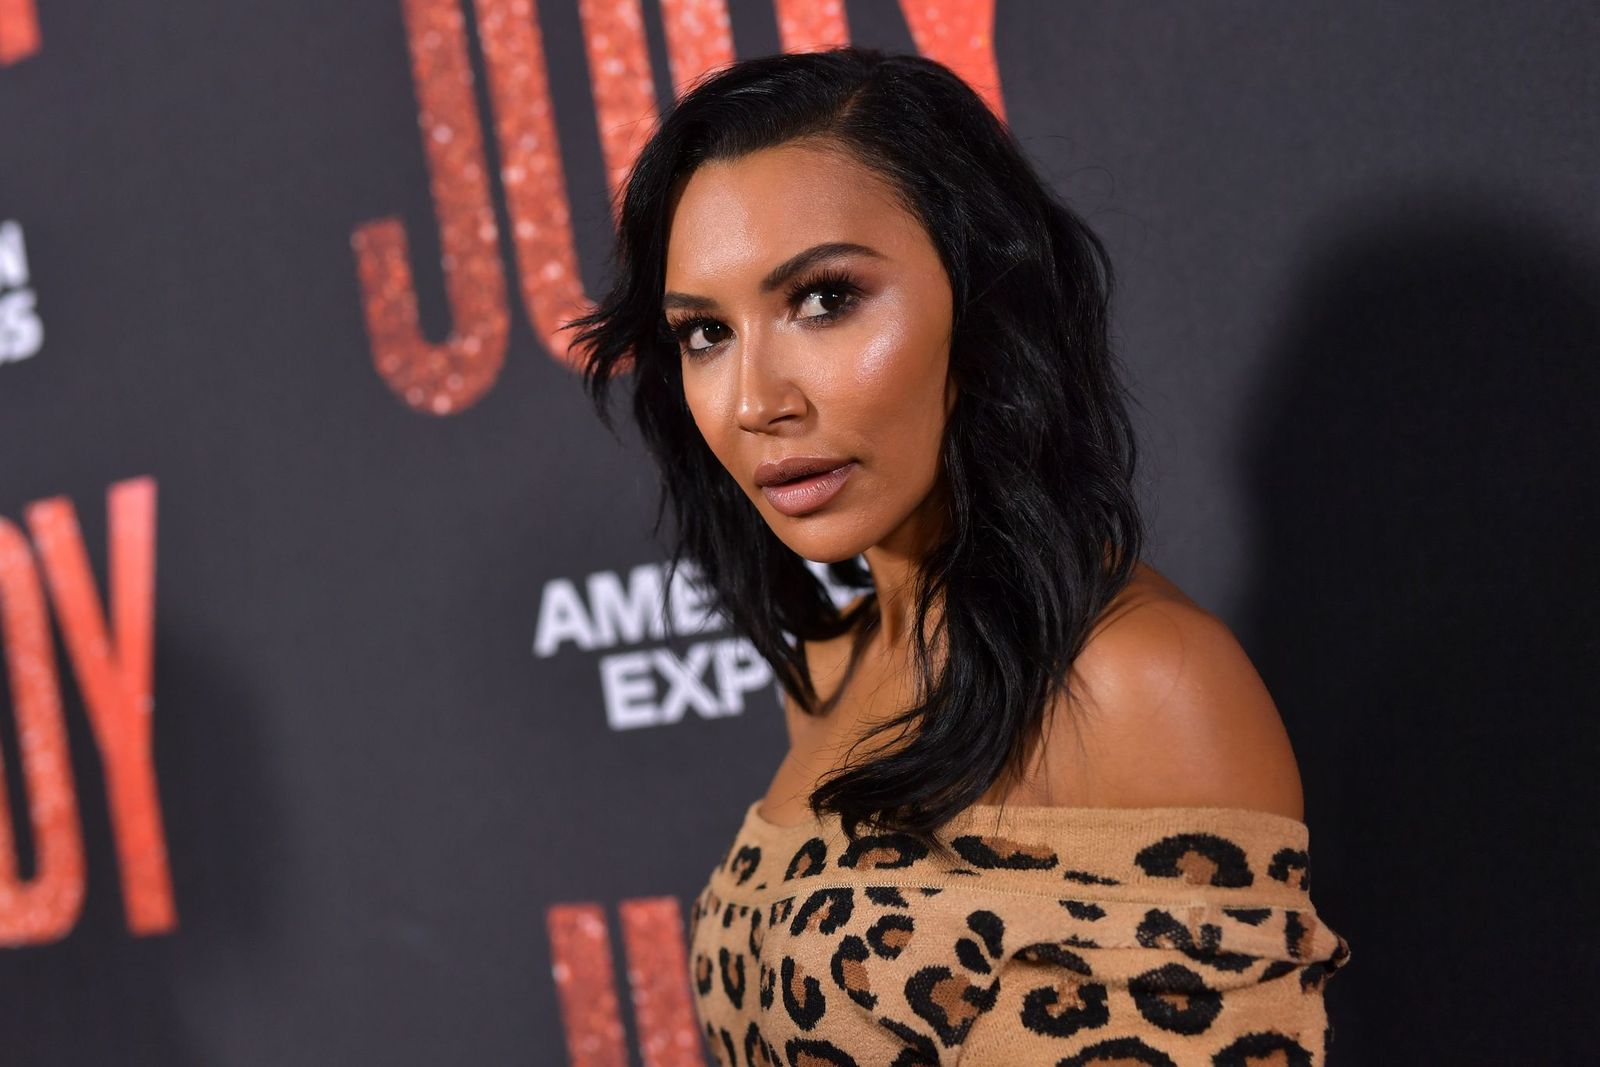 Naya Rivera at the Los Angeles premiere of "Judy" on September 19, 2019. | Photo: Getty Images